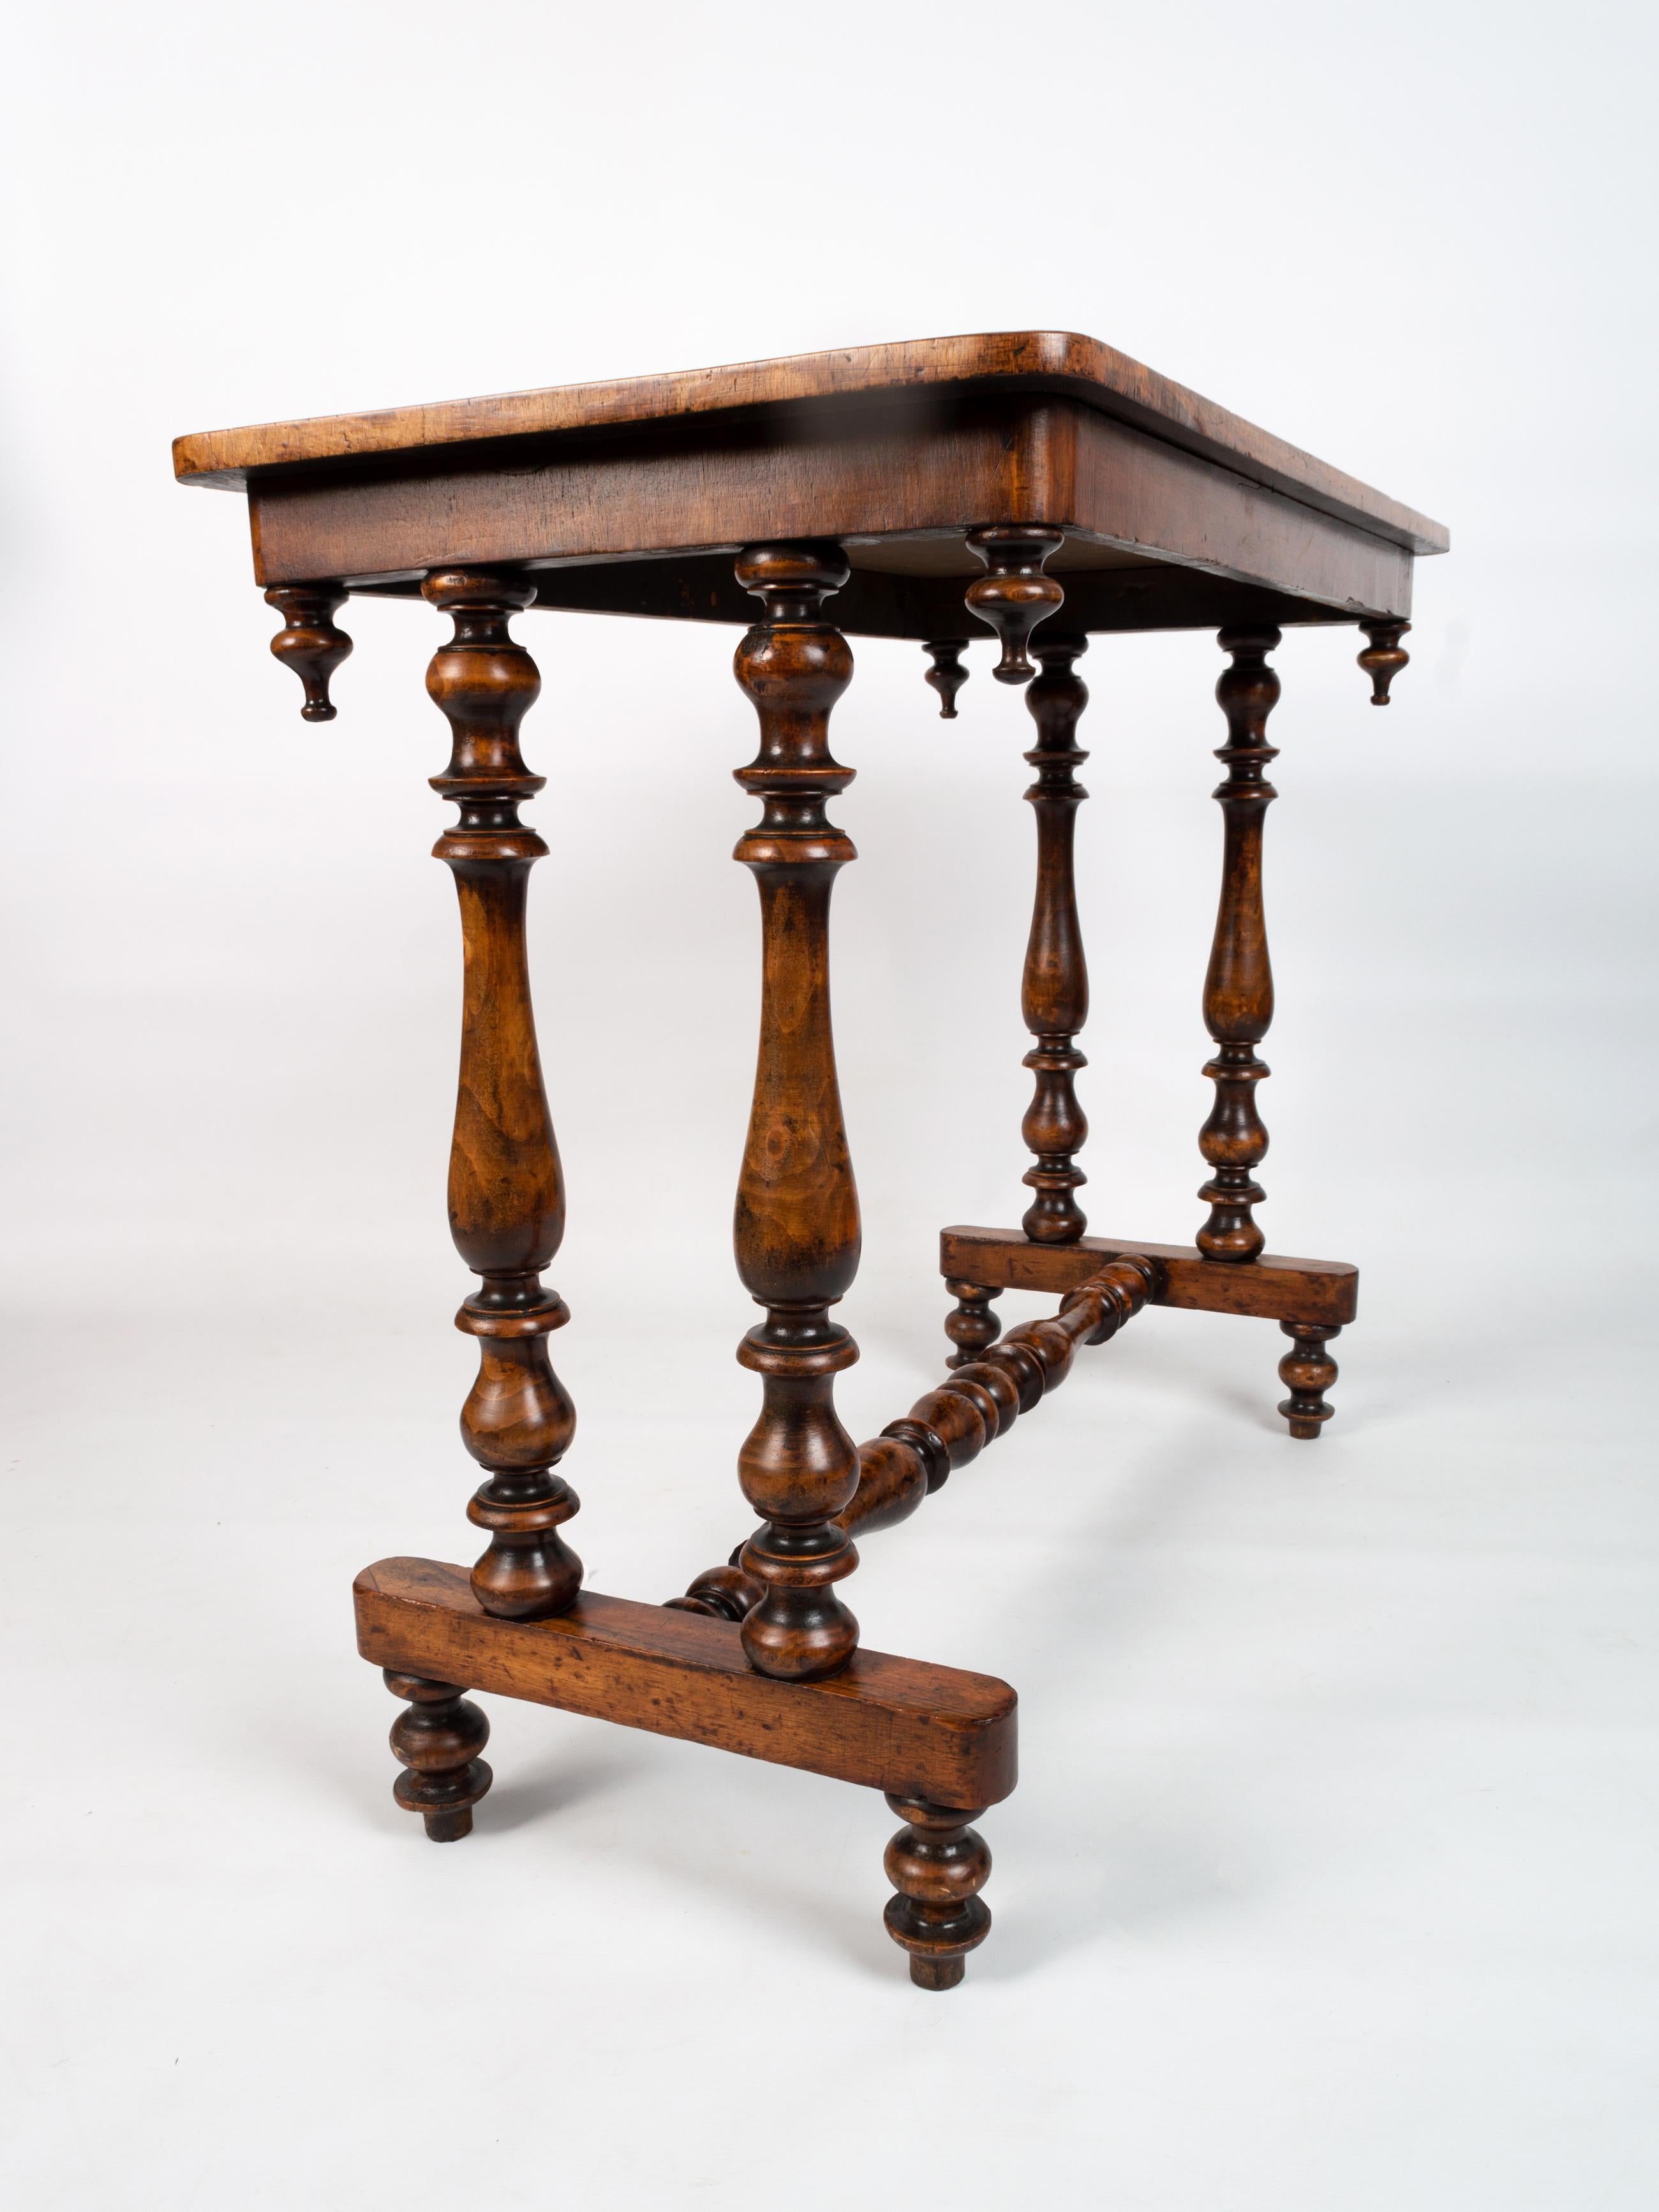 Antique English Edwardian Inlaid Walnut Hall Table Console C.1900 For Sale 4